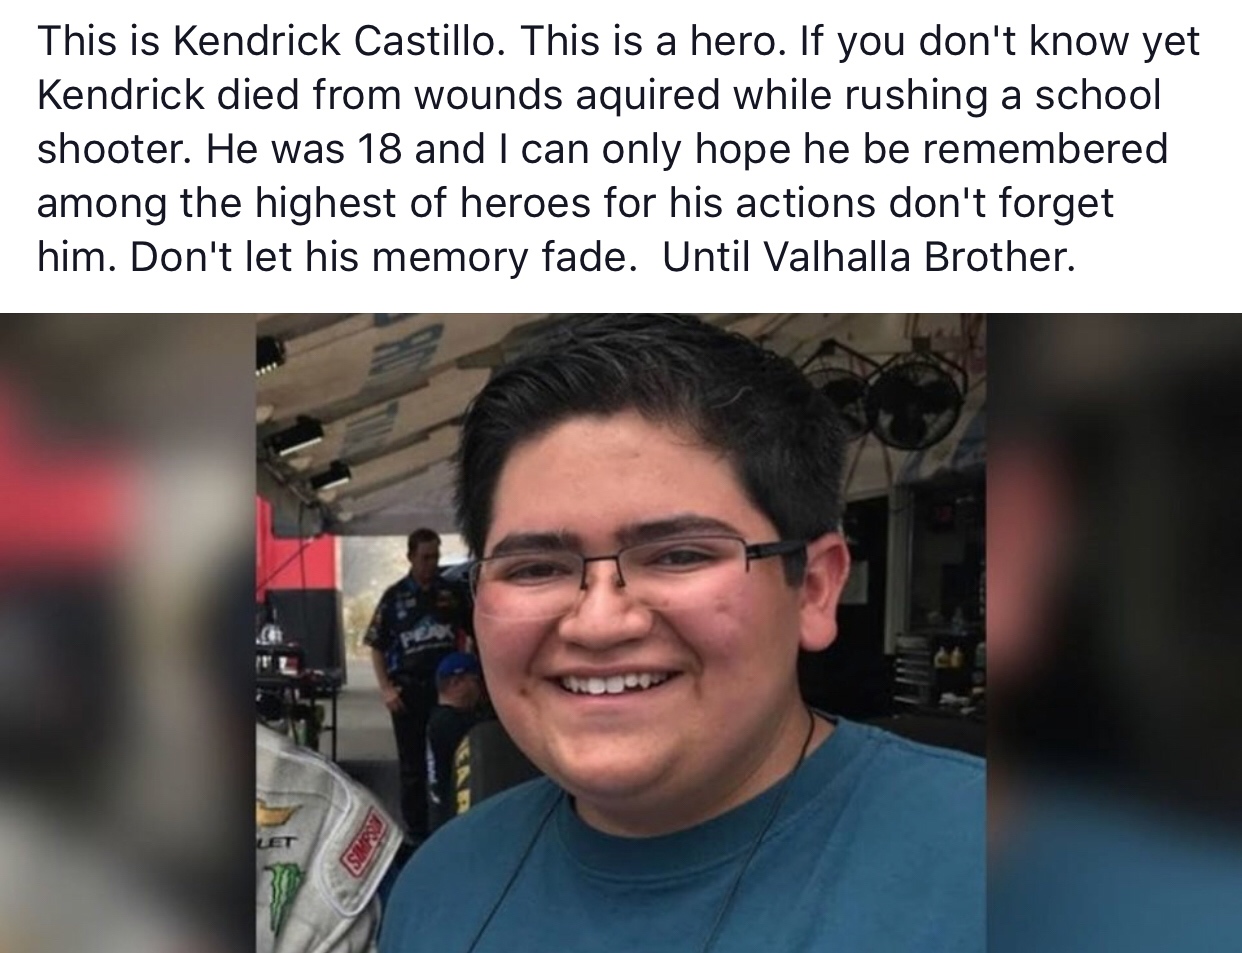 random pics - STEM School Highlands Ranch shooting - This is Kendrick Castillo. This is a hero. If you don't know yet Kendrick died from wounds aquired while rushing a school shooter. He was 18 and I can only hope he be remembered among the highest of her